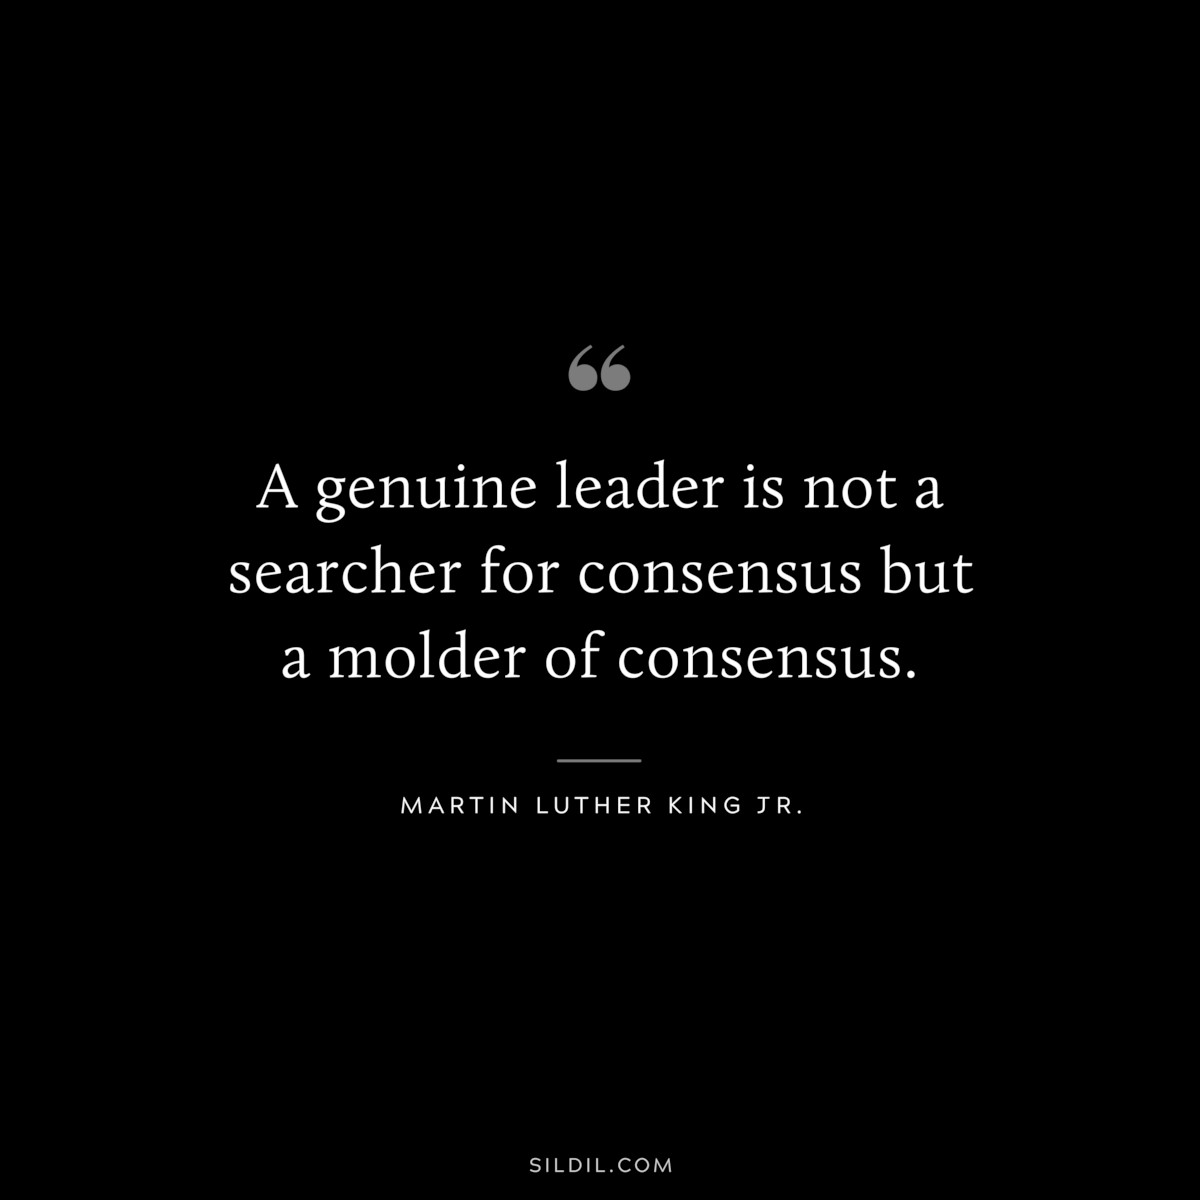 A genuine leader is not a searcher for consensus but a molder of consensus. ― Martin Luther King Jr.